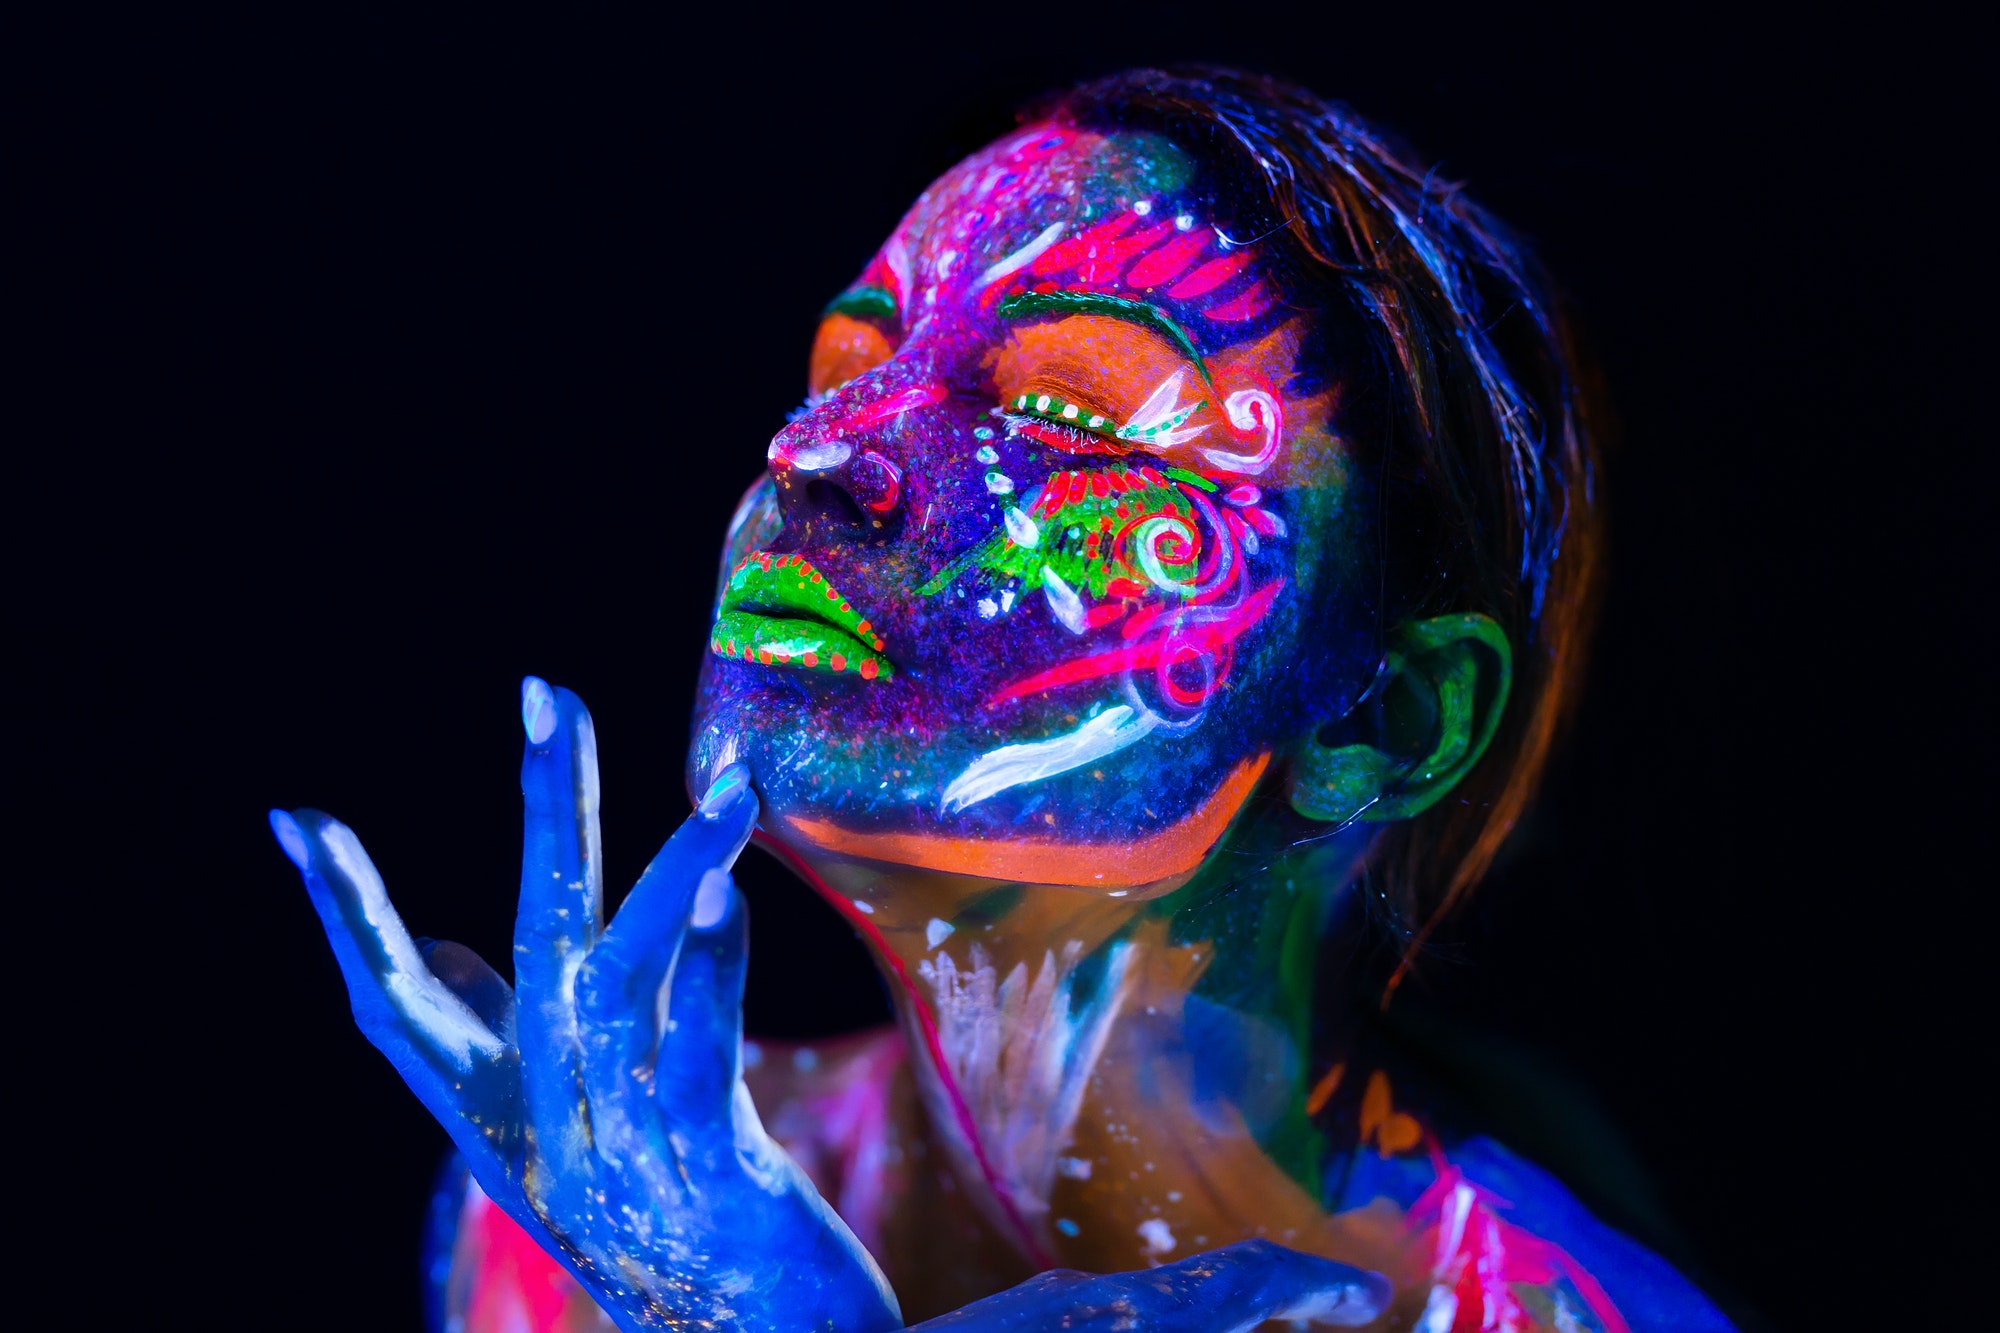 Body art glowing in ultraviolet light. Body art on the body and hand of a girl glowing in the